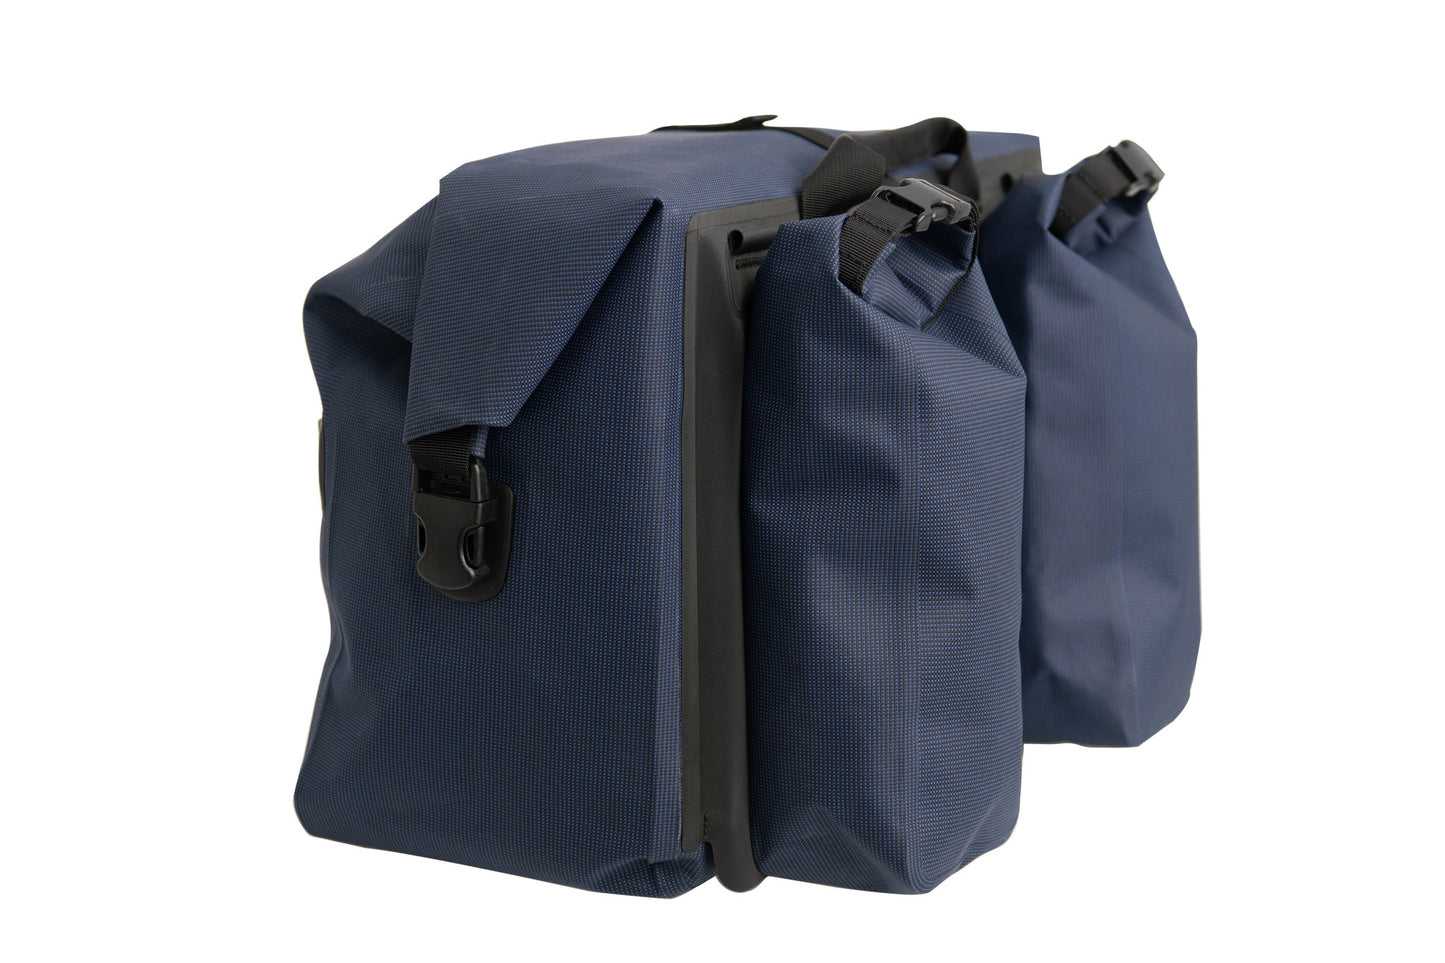 Borough Waterproof L, Navy, with frame